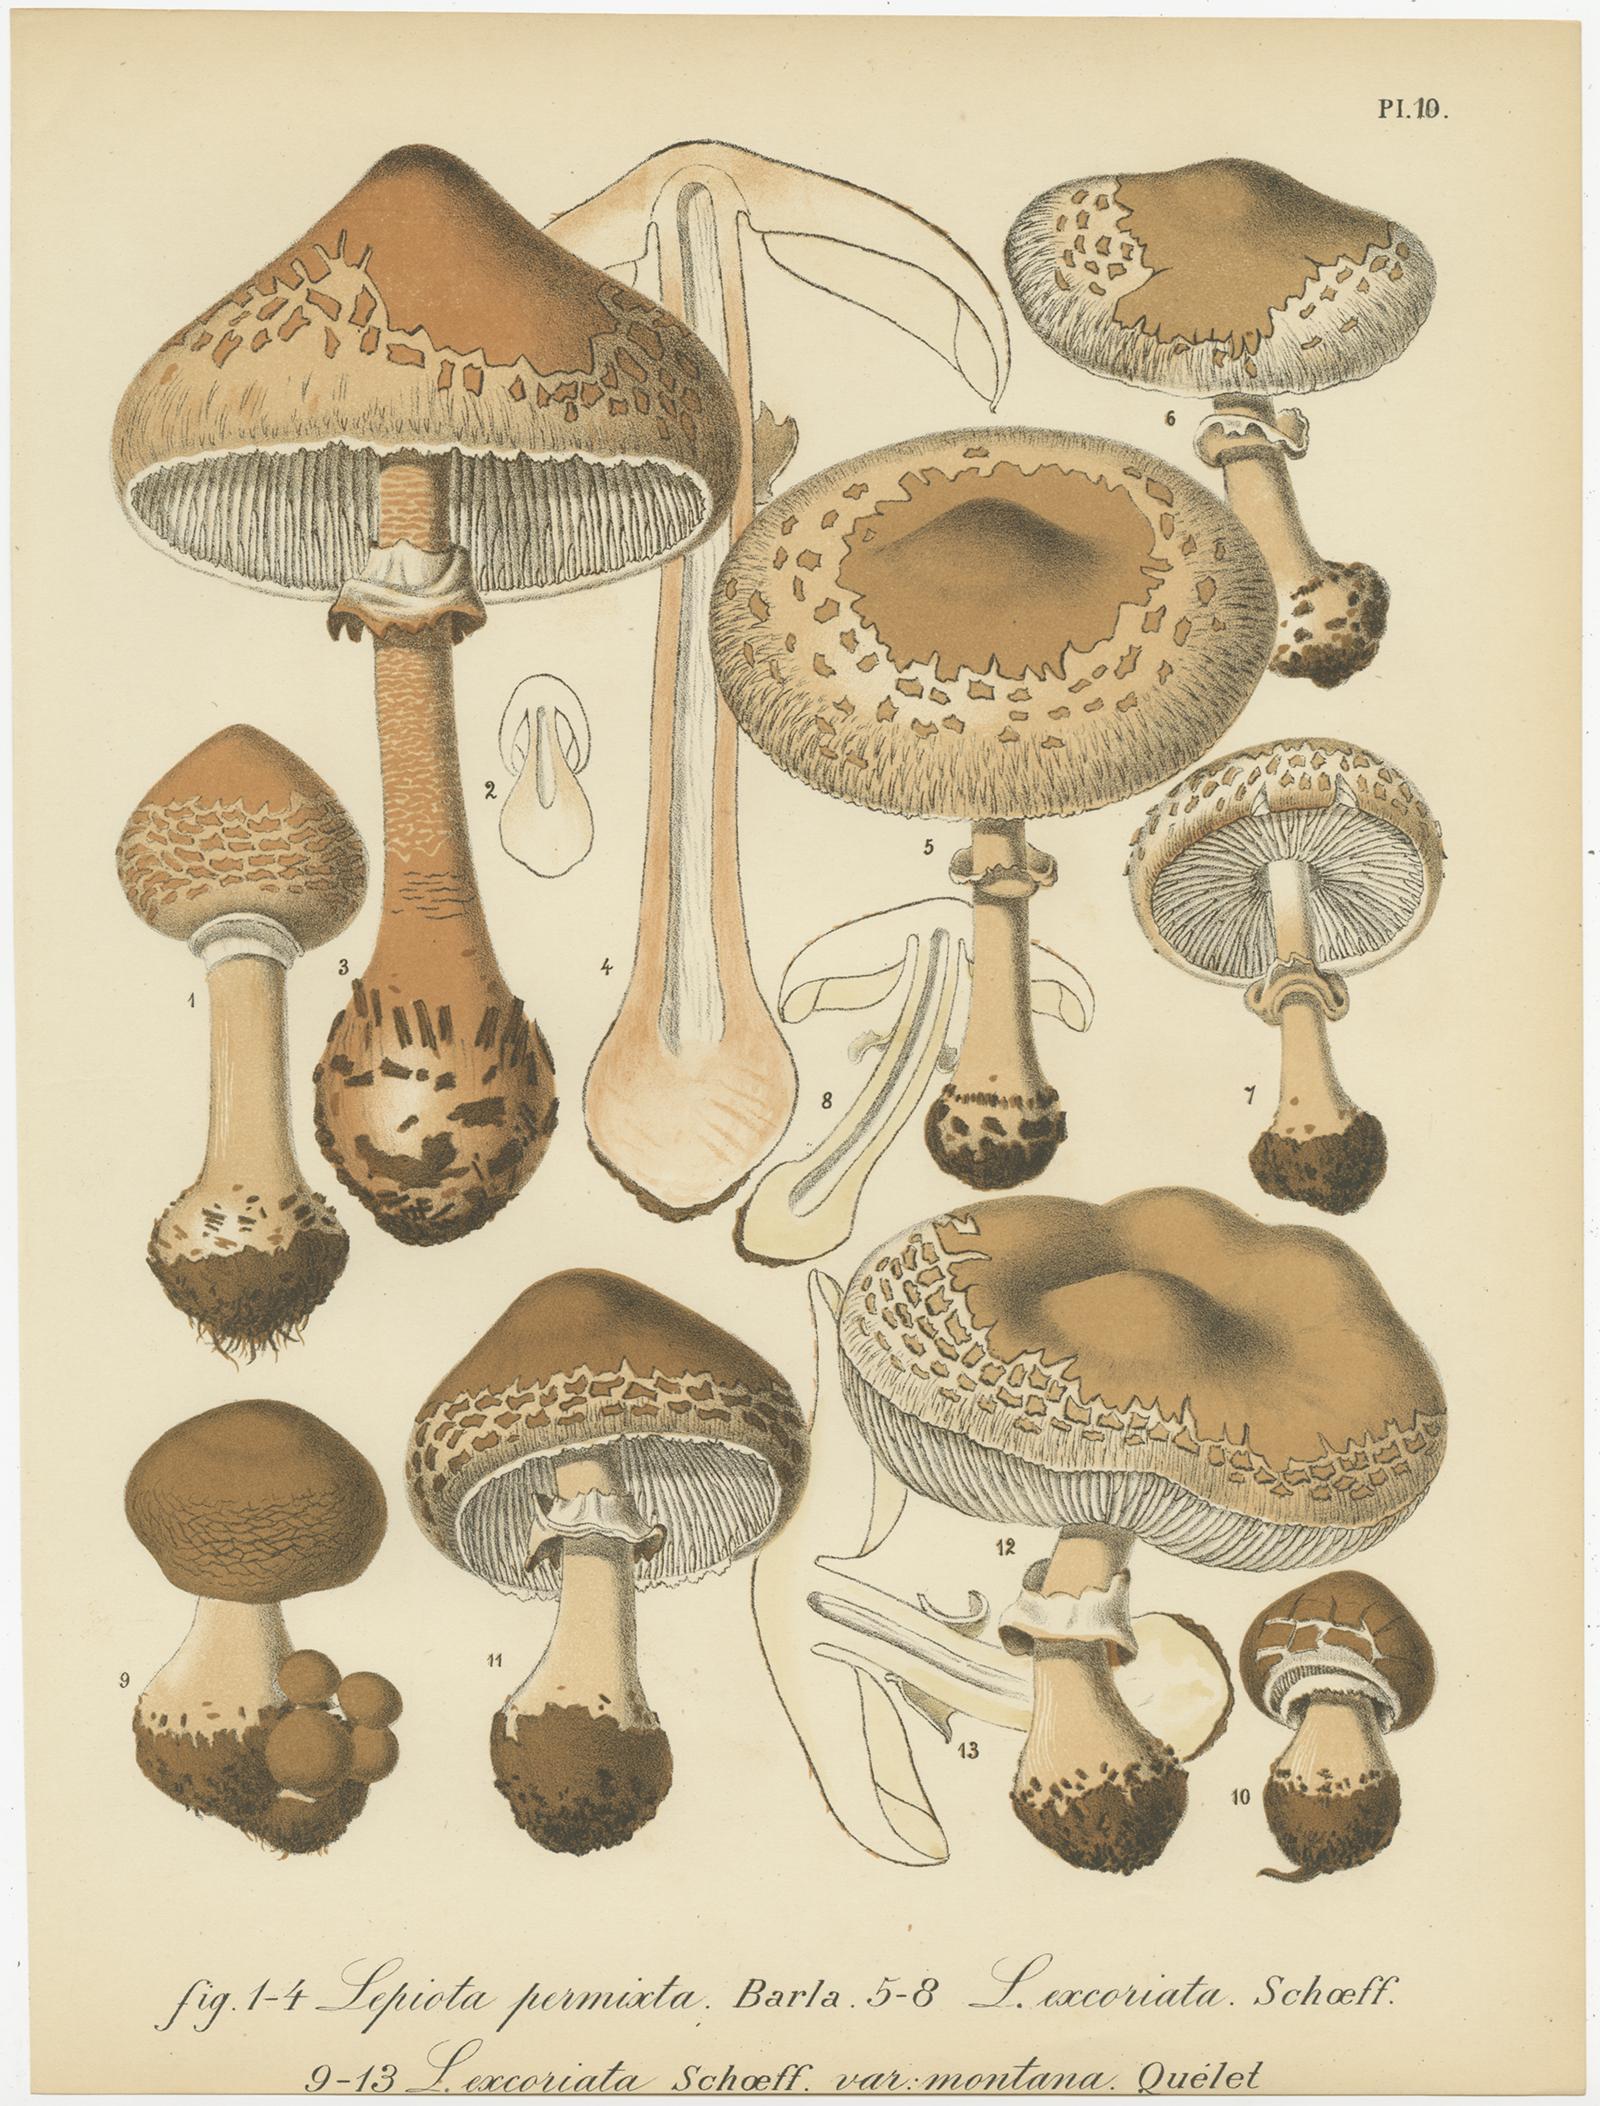 Paper Set of 8 Antique Mycology Prints of Various Fungi by Barla, circa 1890